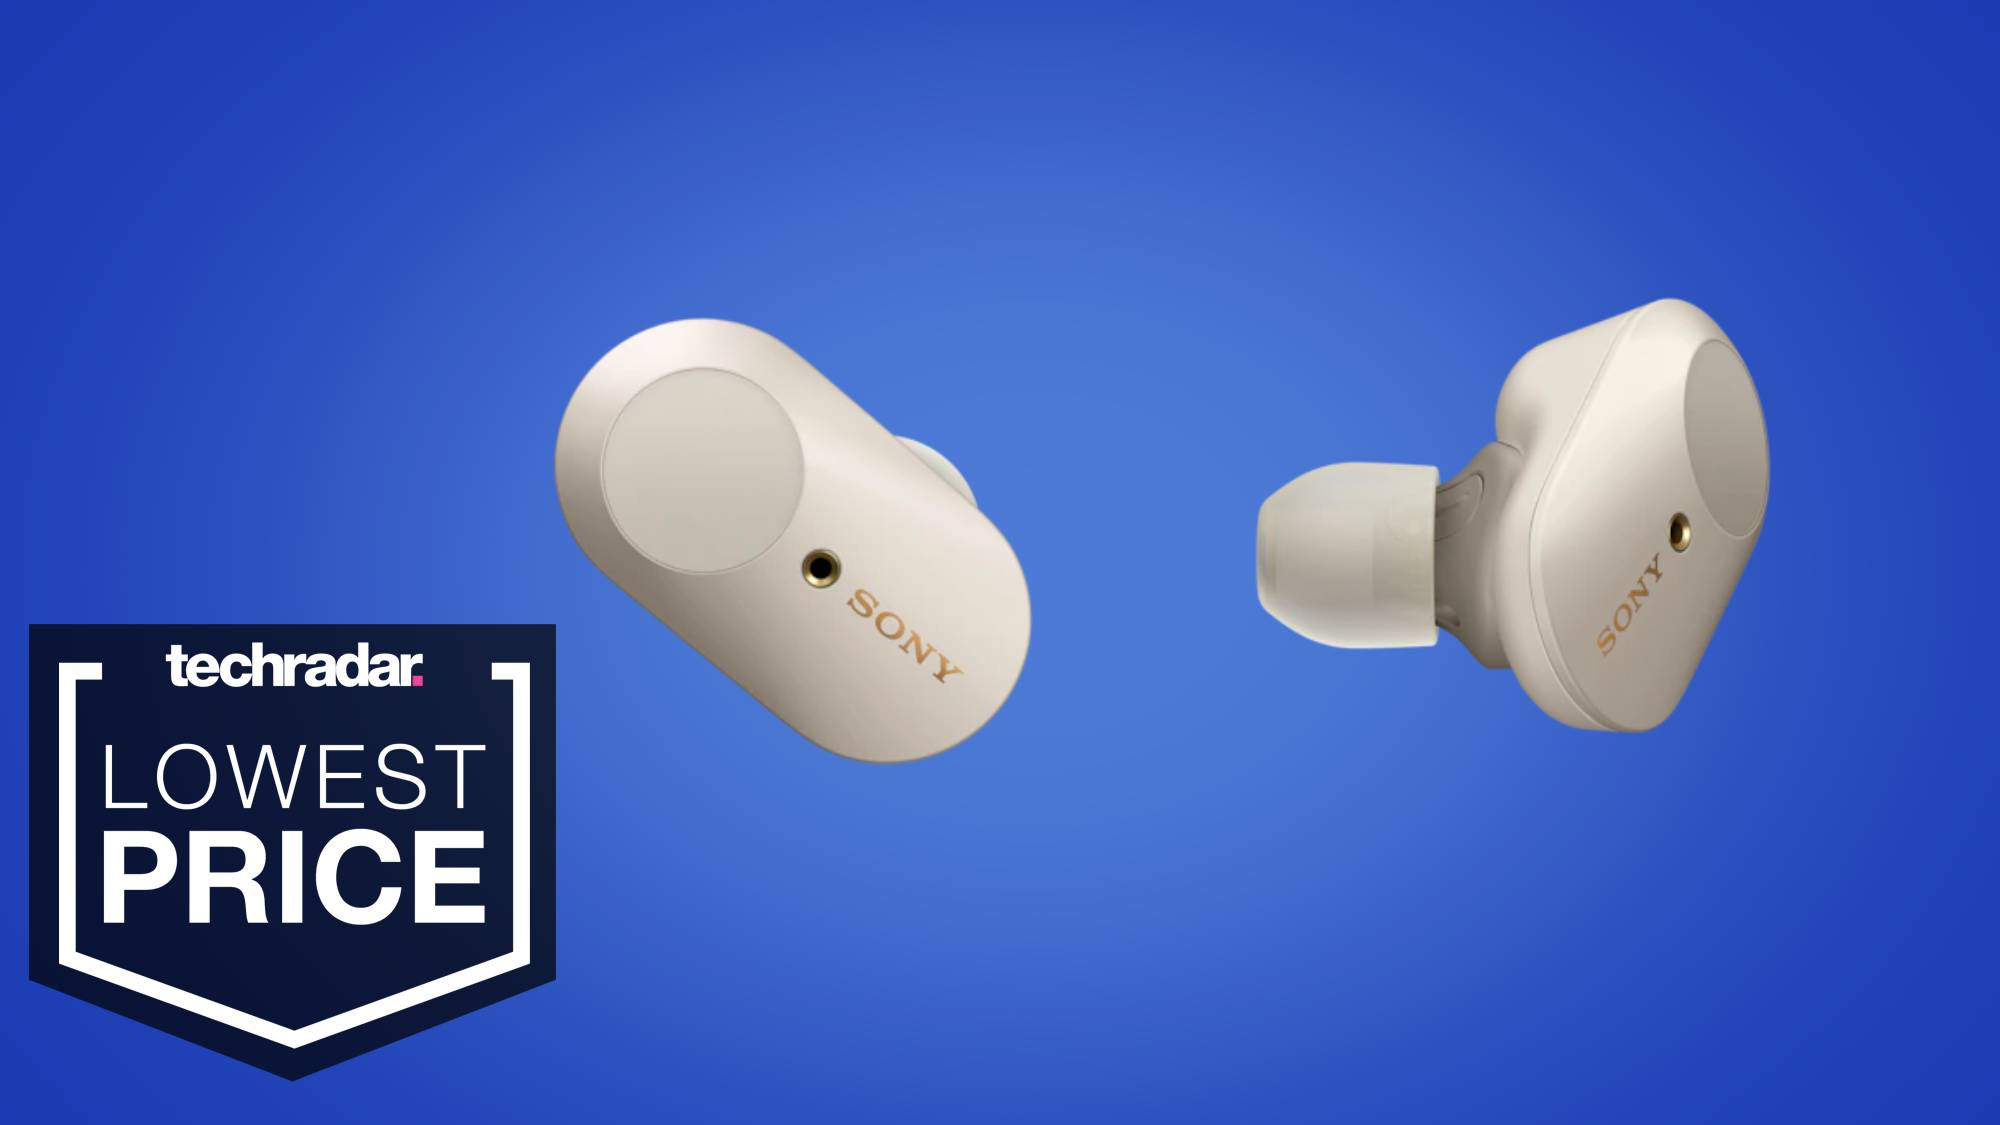 The superb Sony WF-1000XM3 wireless earbuds are down to their lowest-ever price